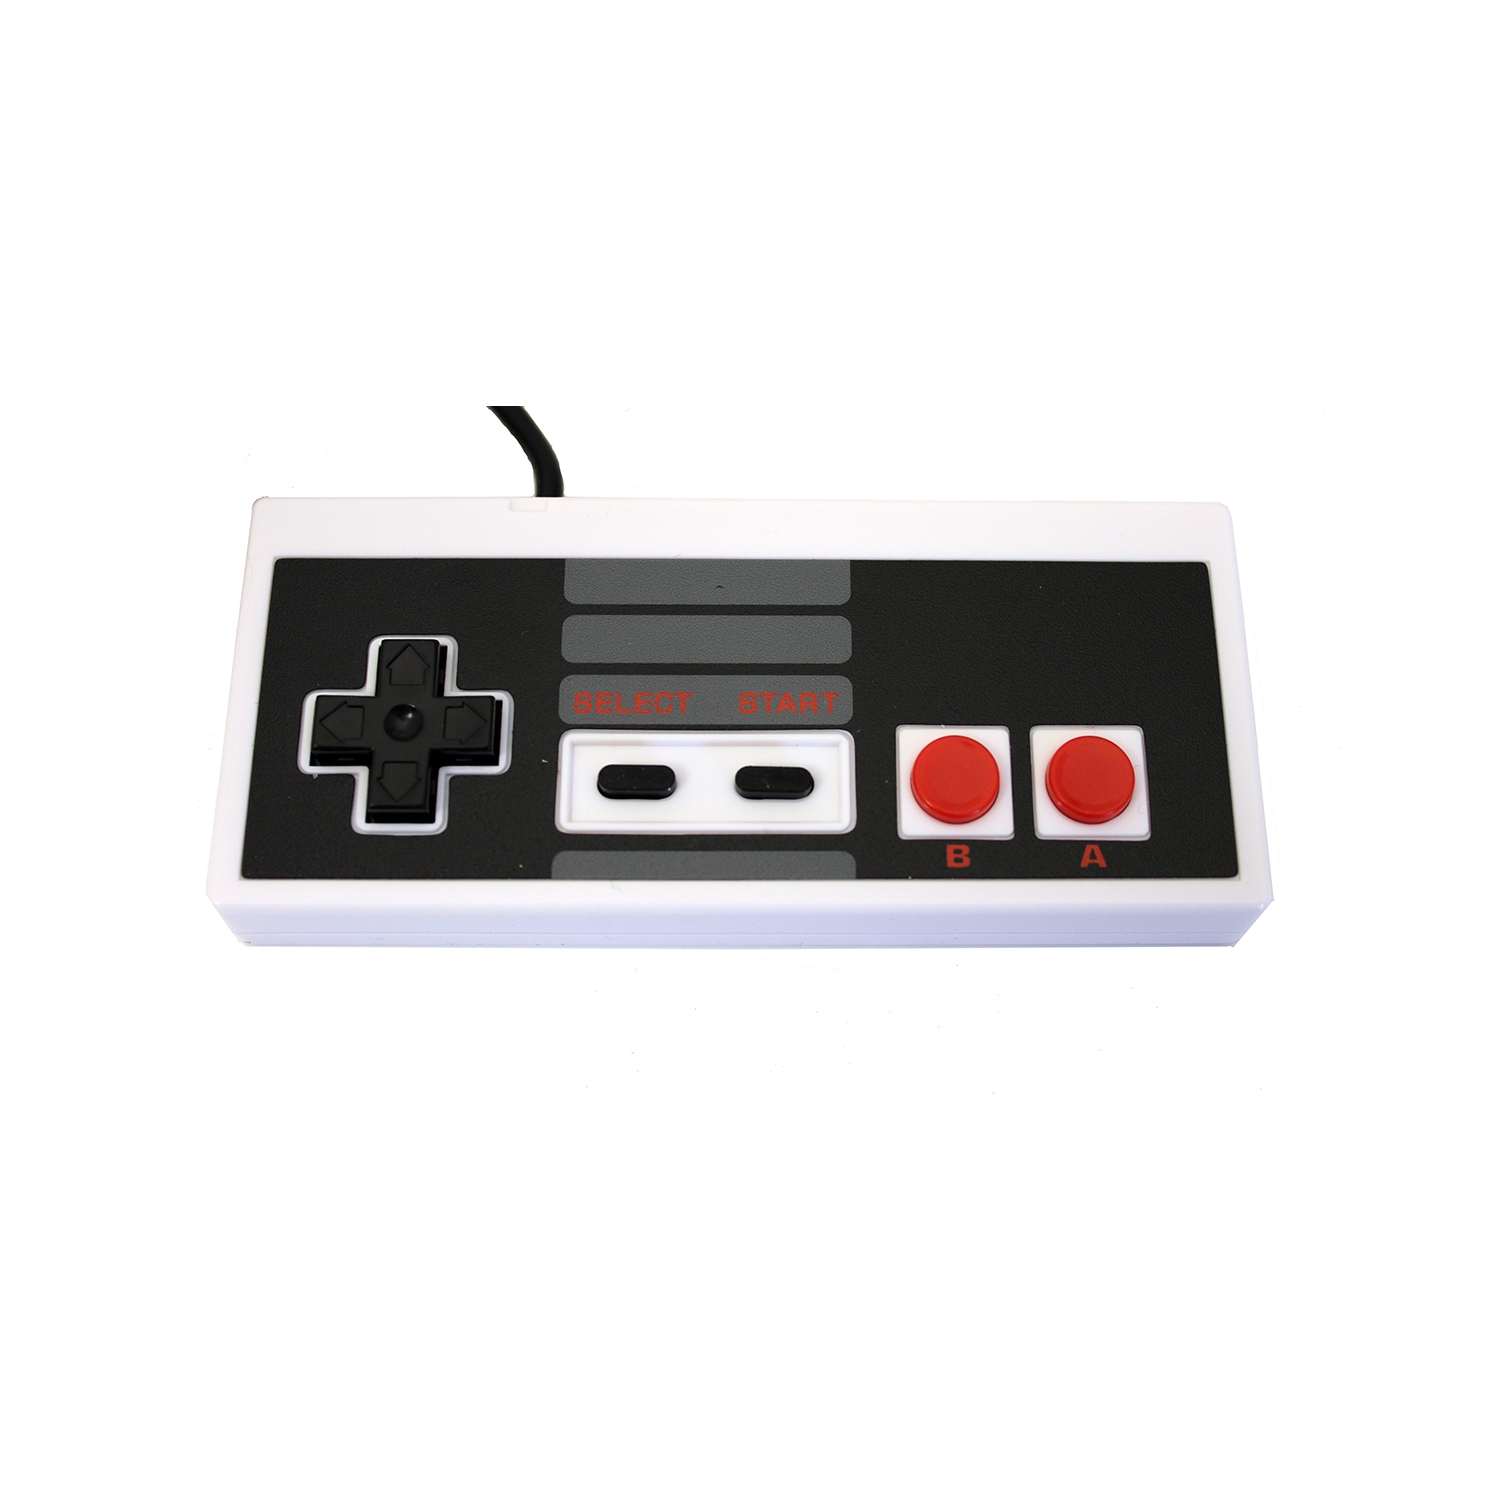 New NES Classic Replacement Controller - by Mars Devices